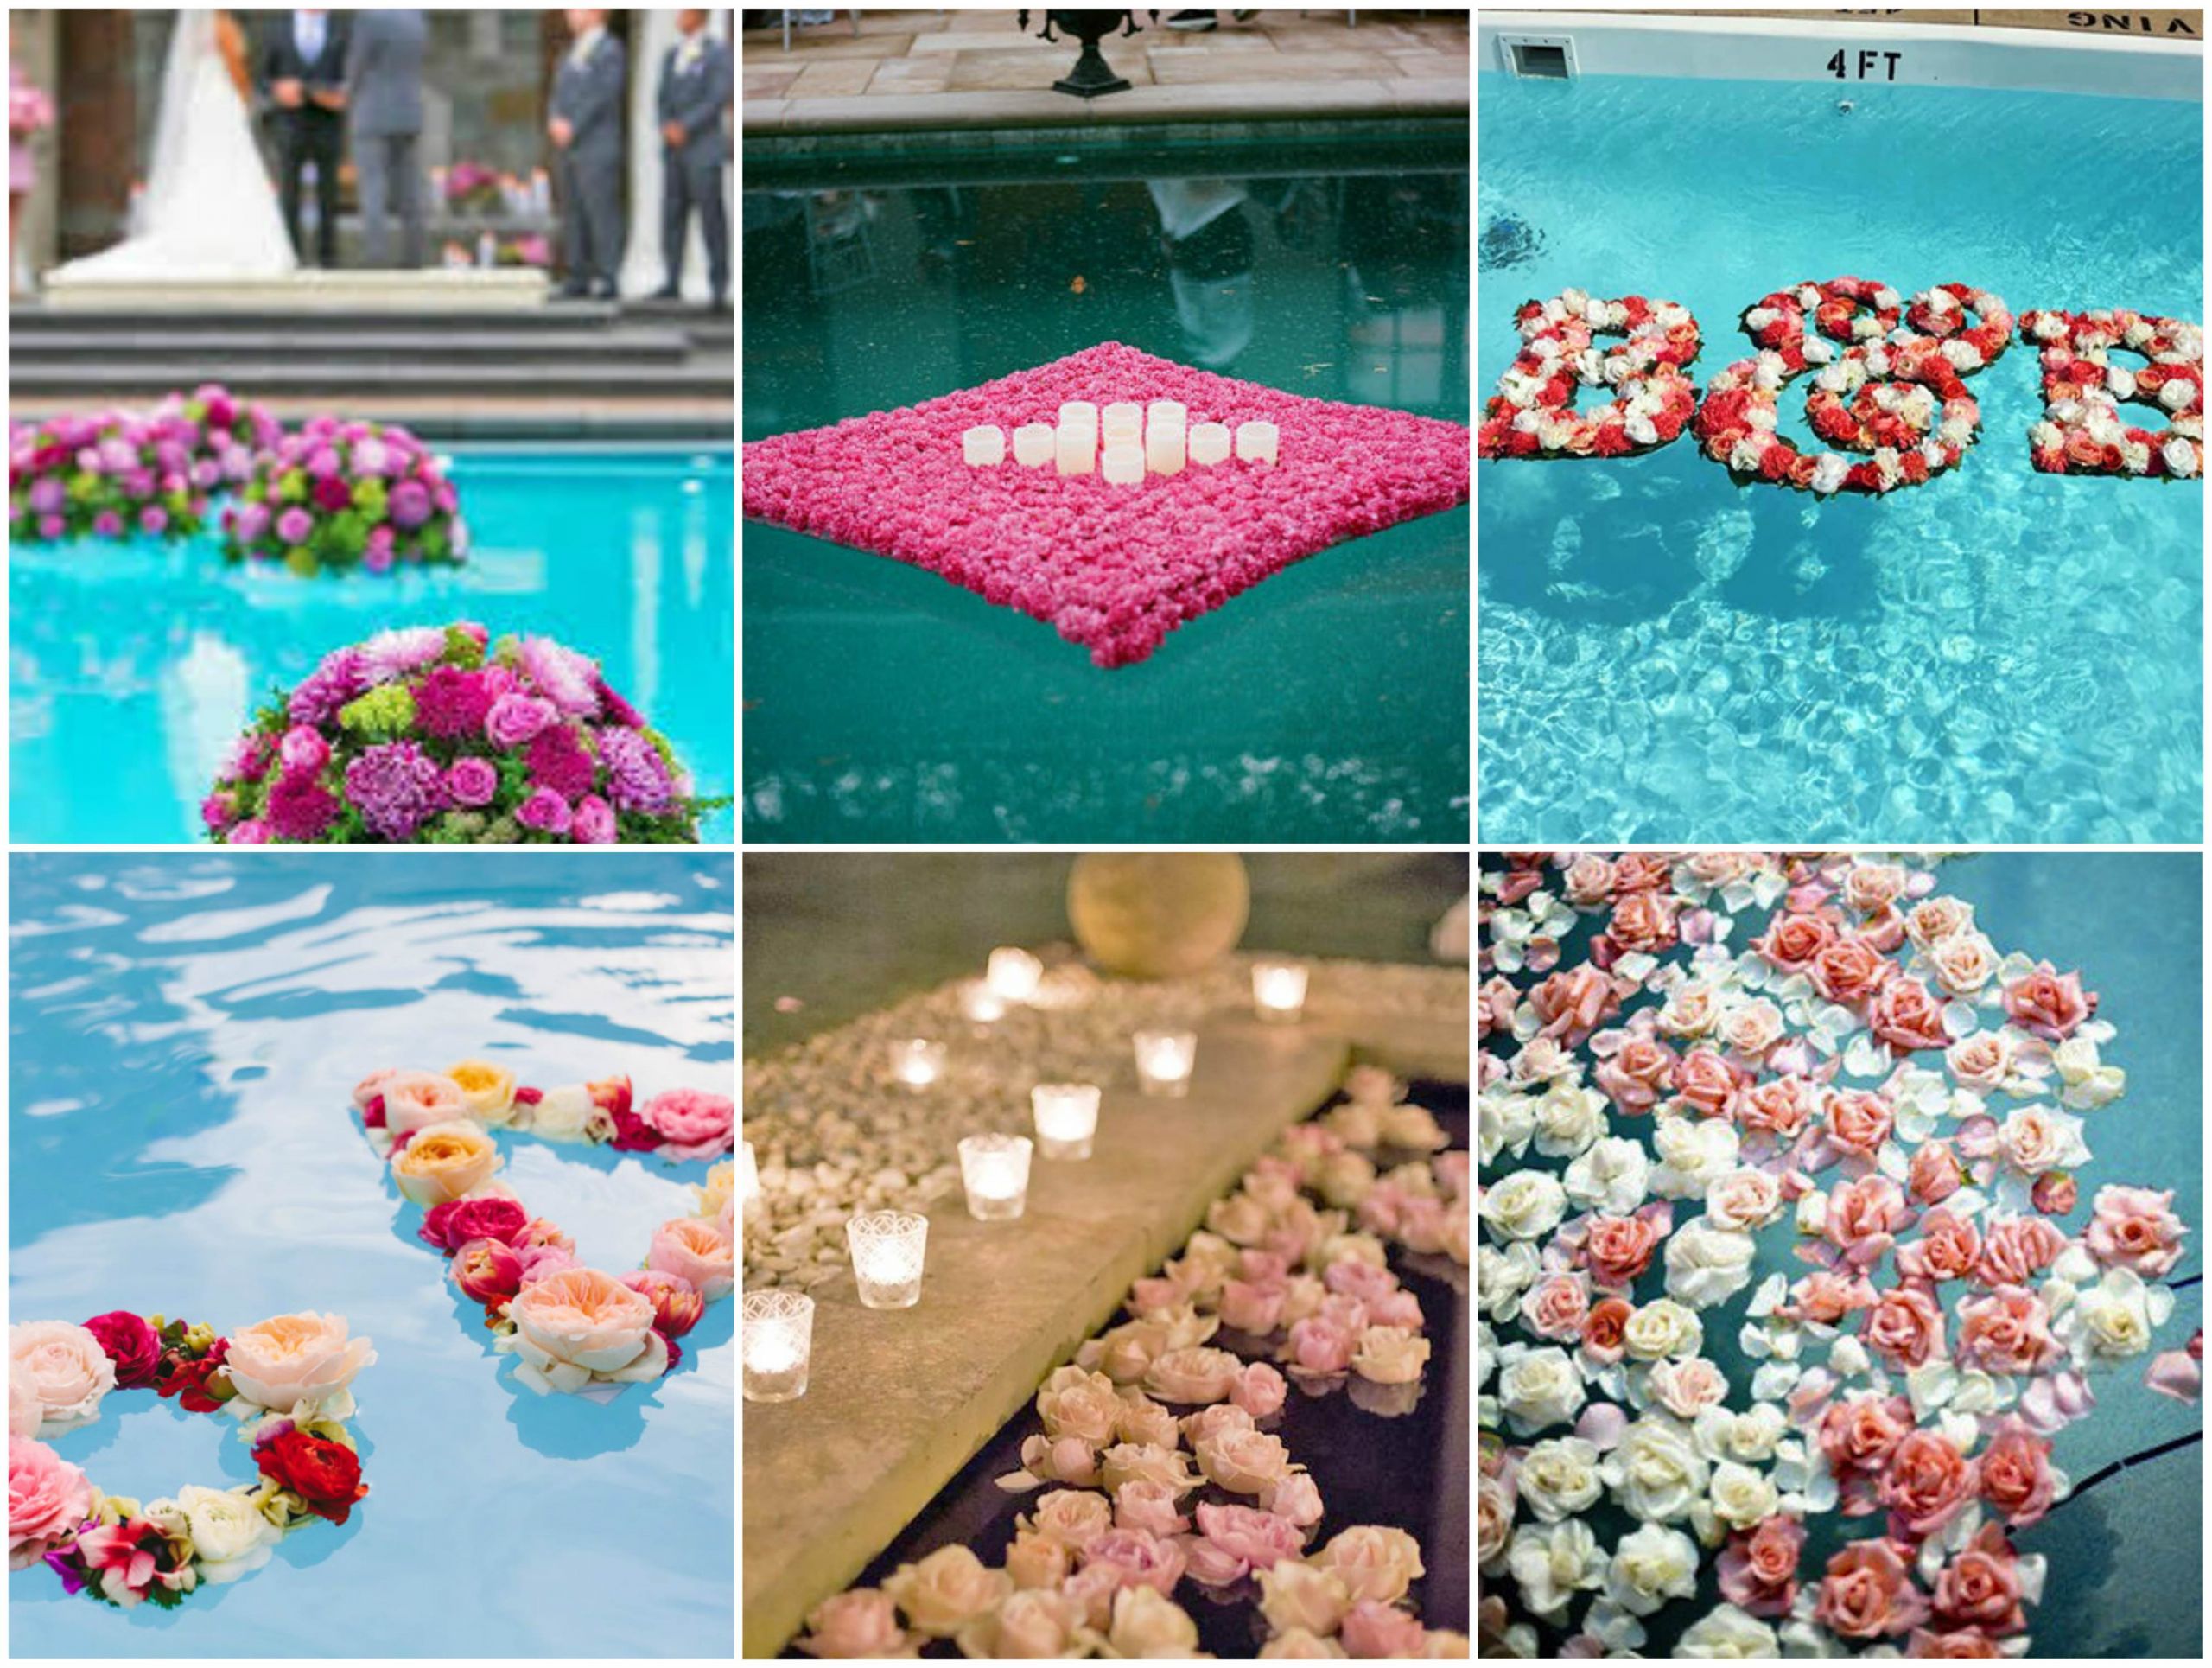 Pool Party Decoration Ideas
 Top Poolside Decor Ideas For Your Wedding Pool Party